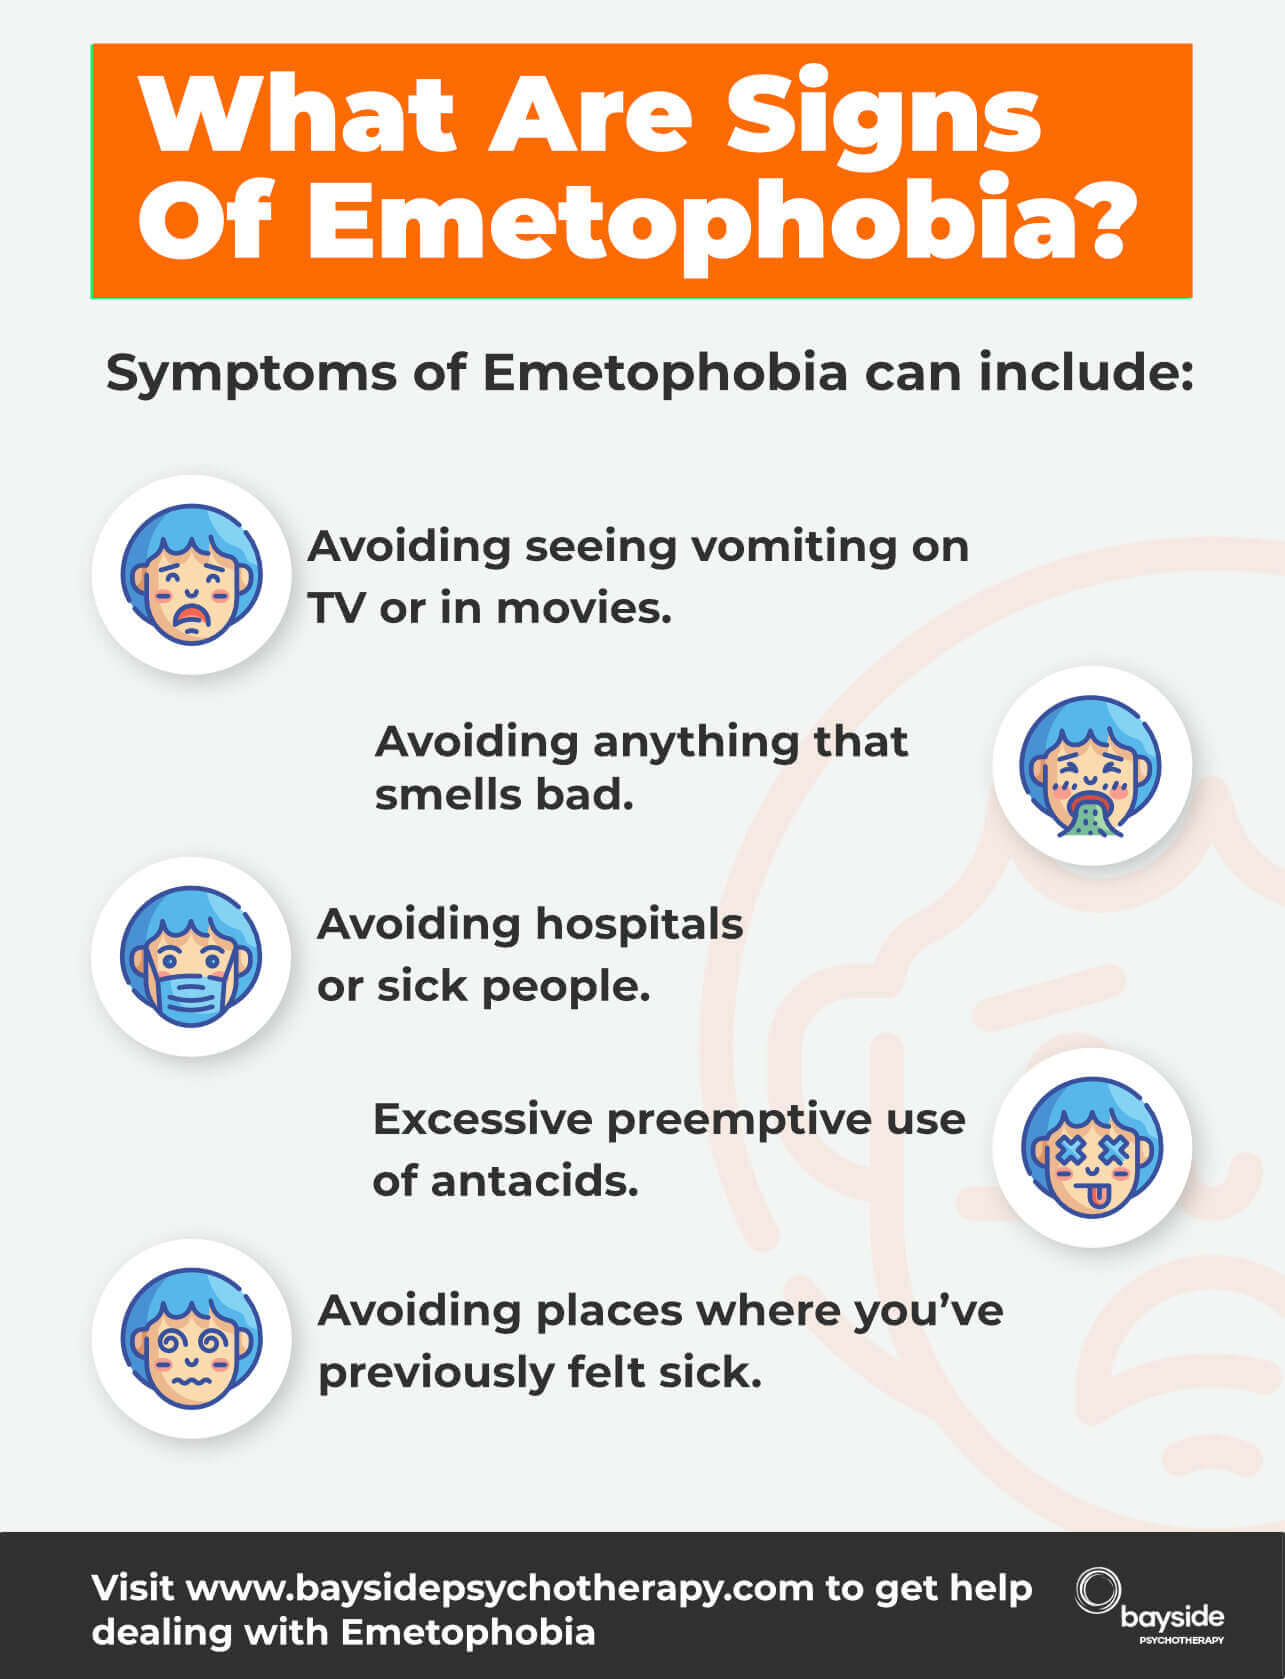 Signs of Emetophobia Infographic Bayside Psychotherapy (1)